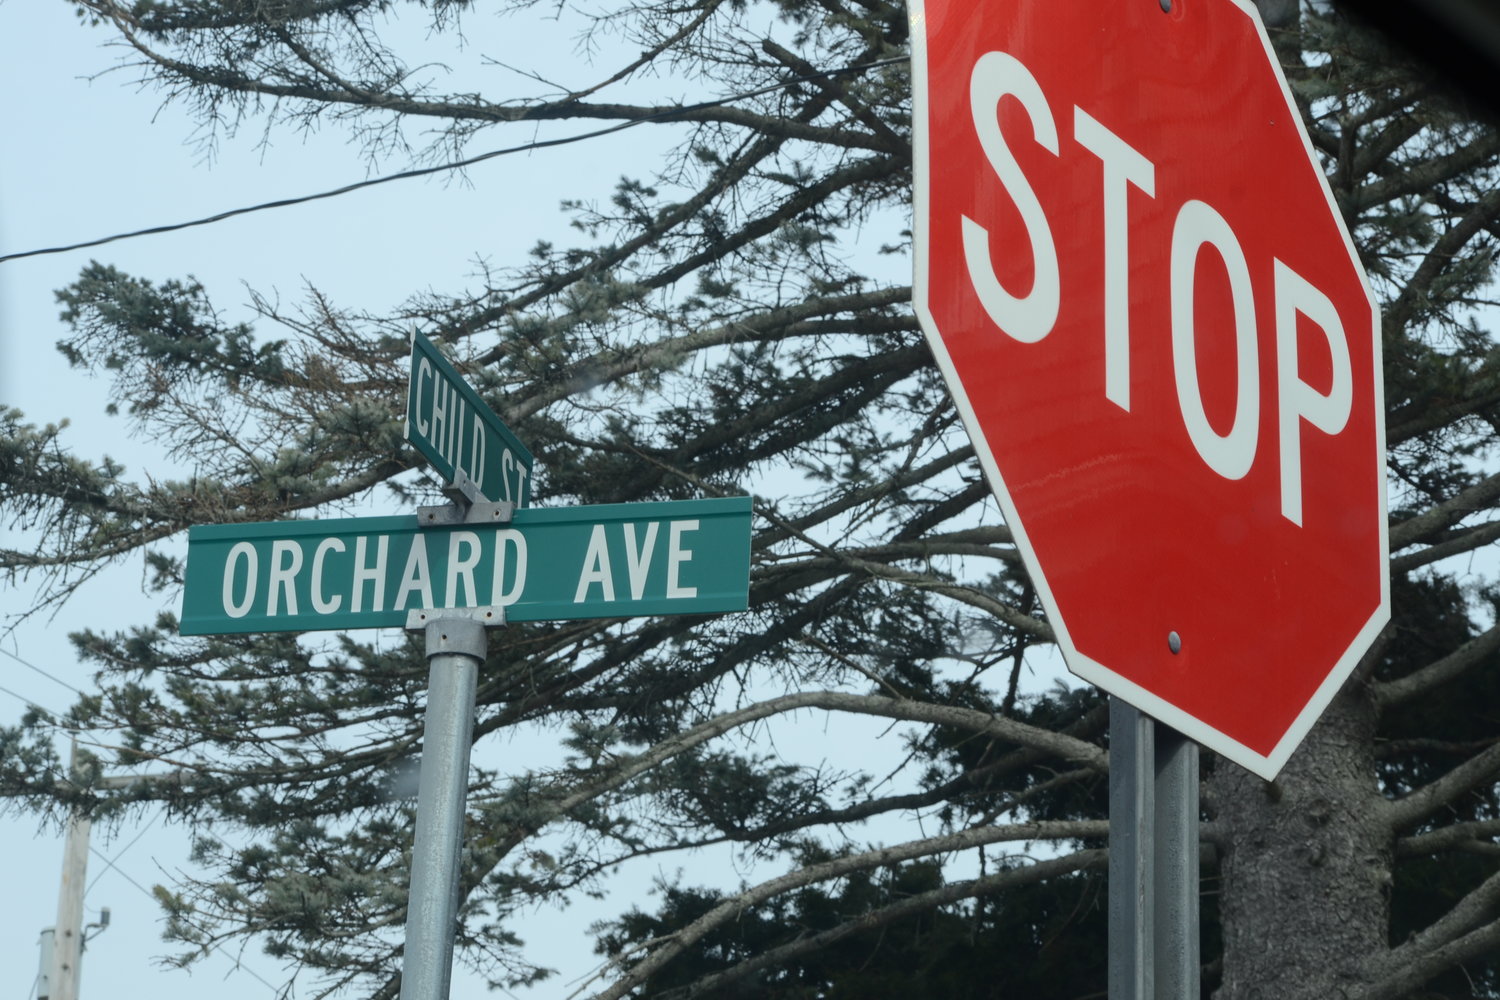 The intersection of Orchard Avenue and Child Street has been a reoccurring issue for residents who live on Orchard Avenue, as people going to and from Kickemuit Middle School utilize the route as a cut-through to try and save time on their commutes.